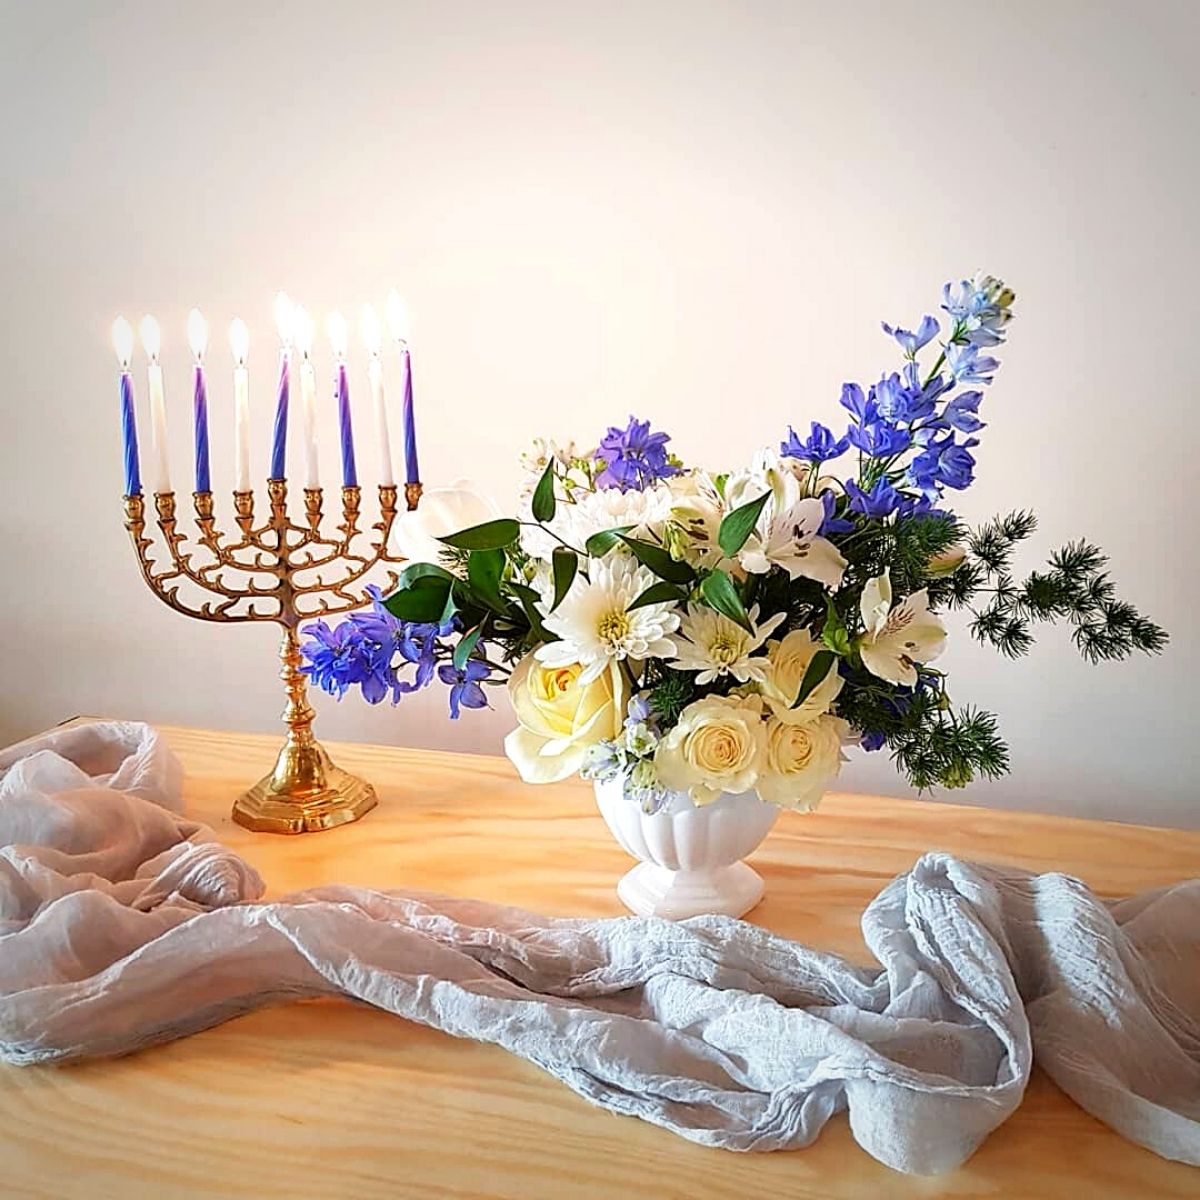 Remarkable Flowers in the Torah